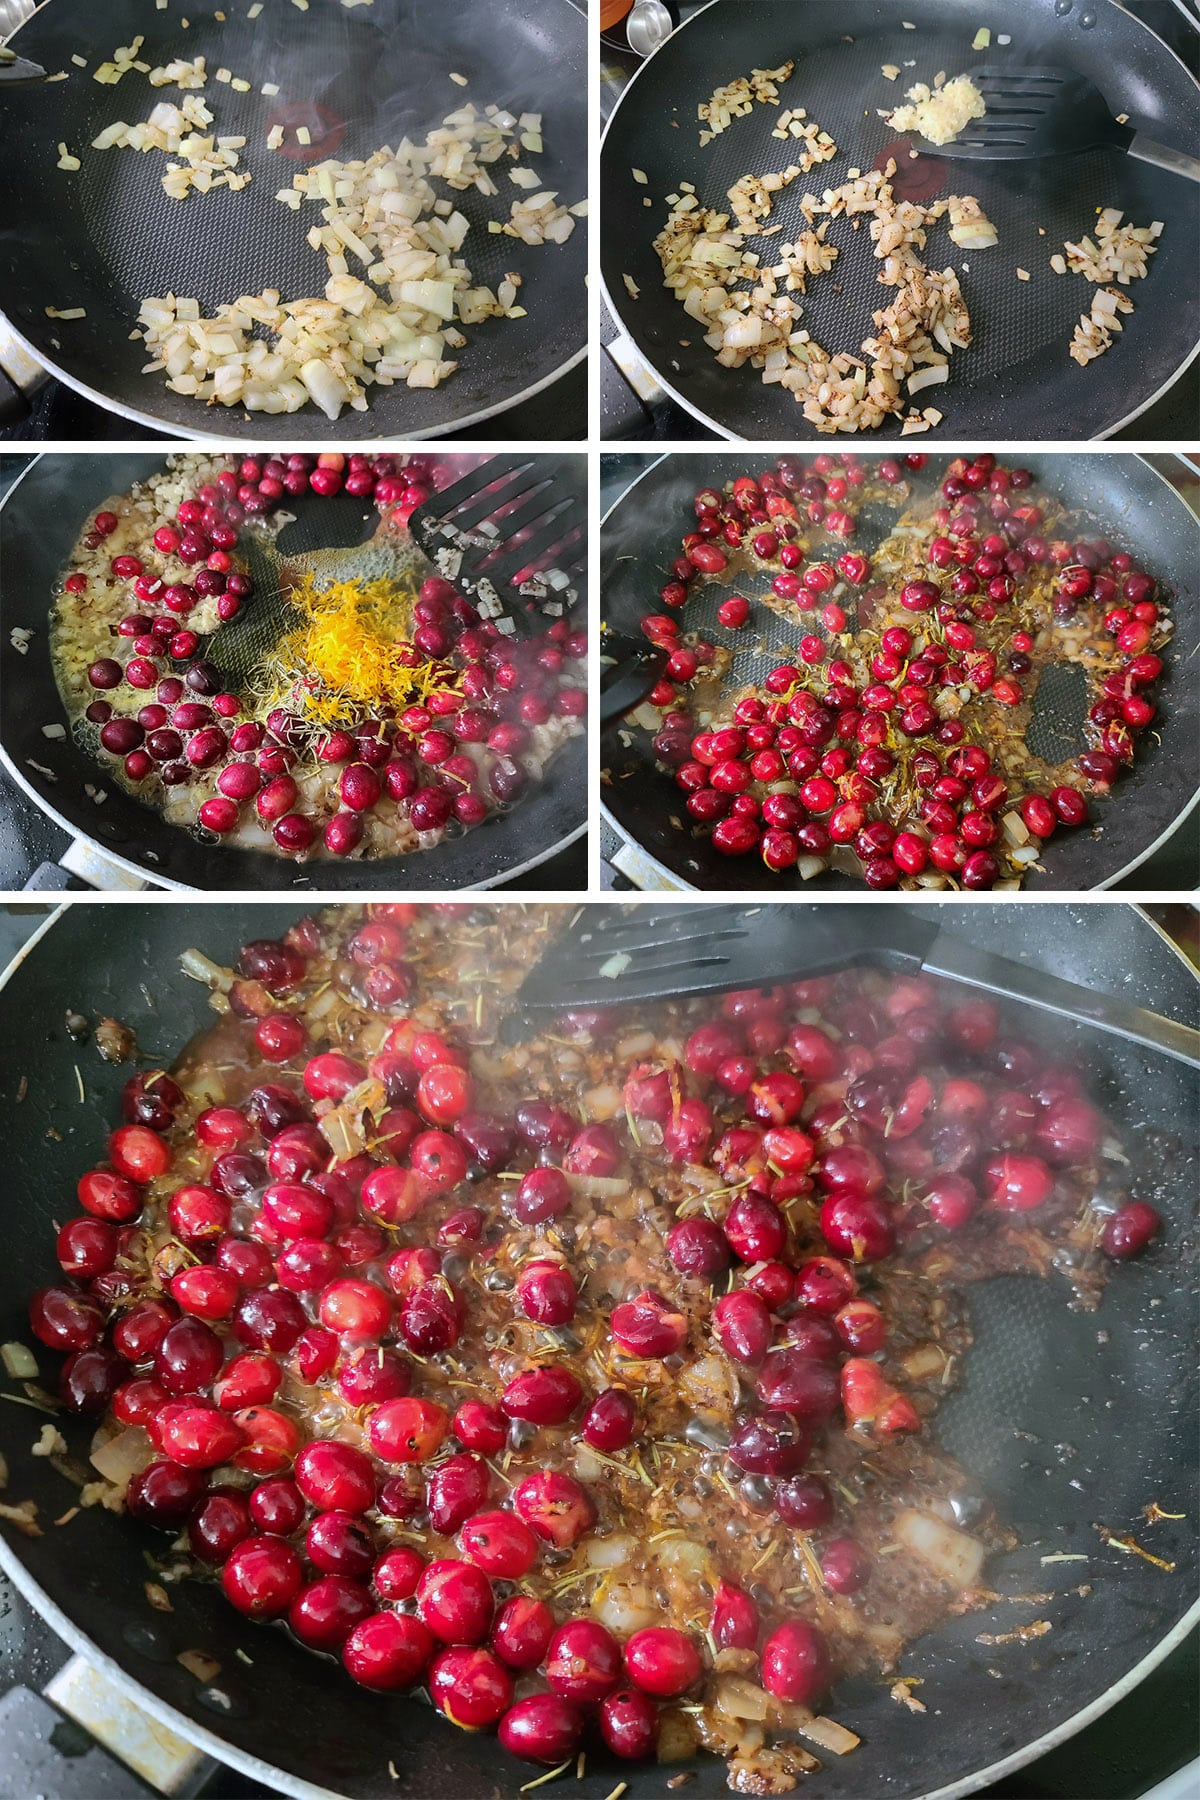 A 5 part image showing the cranberry orange sauce being cooked.